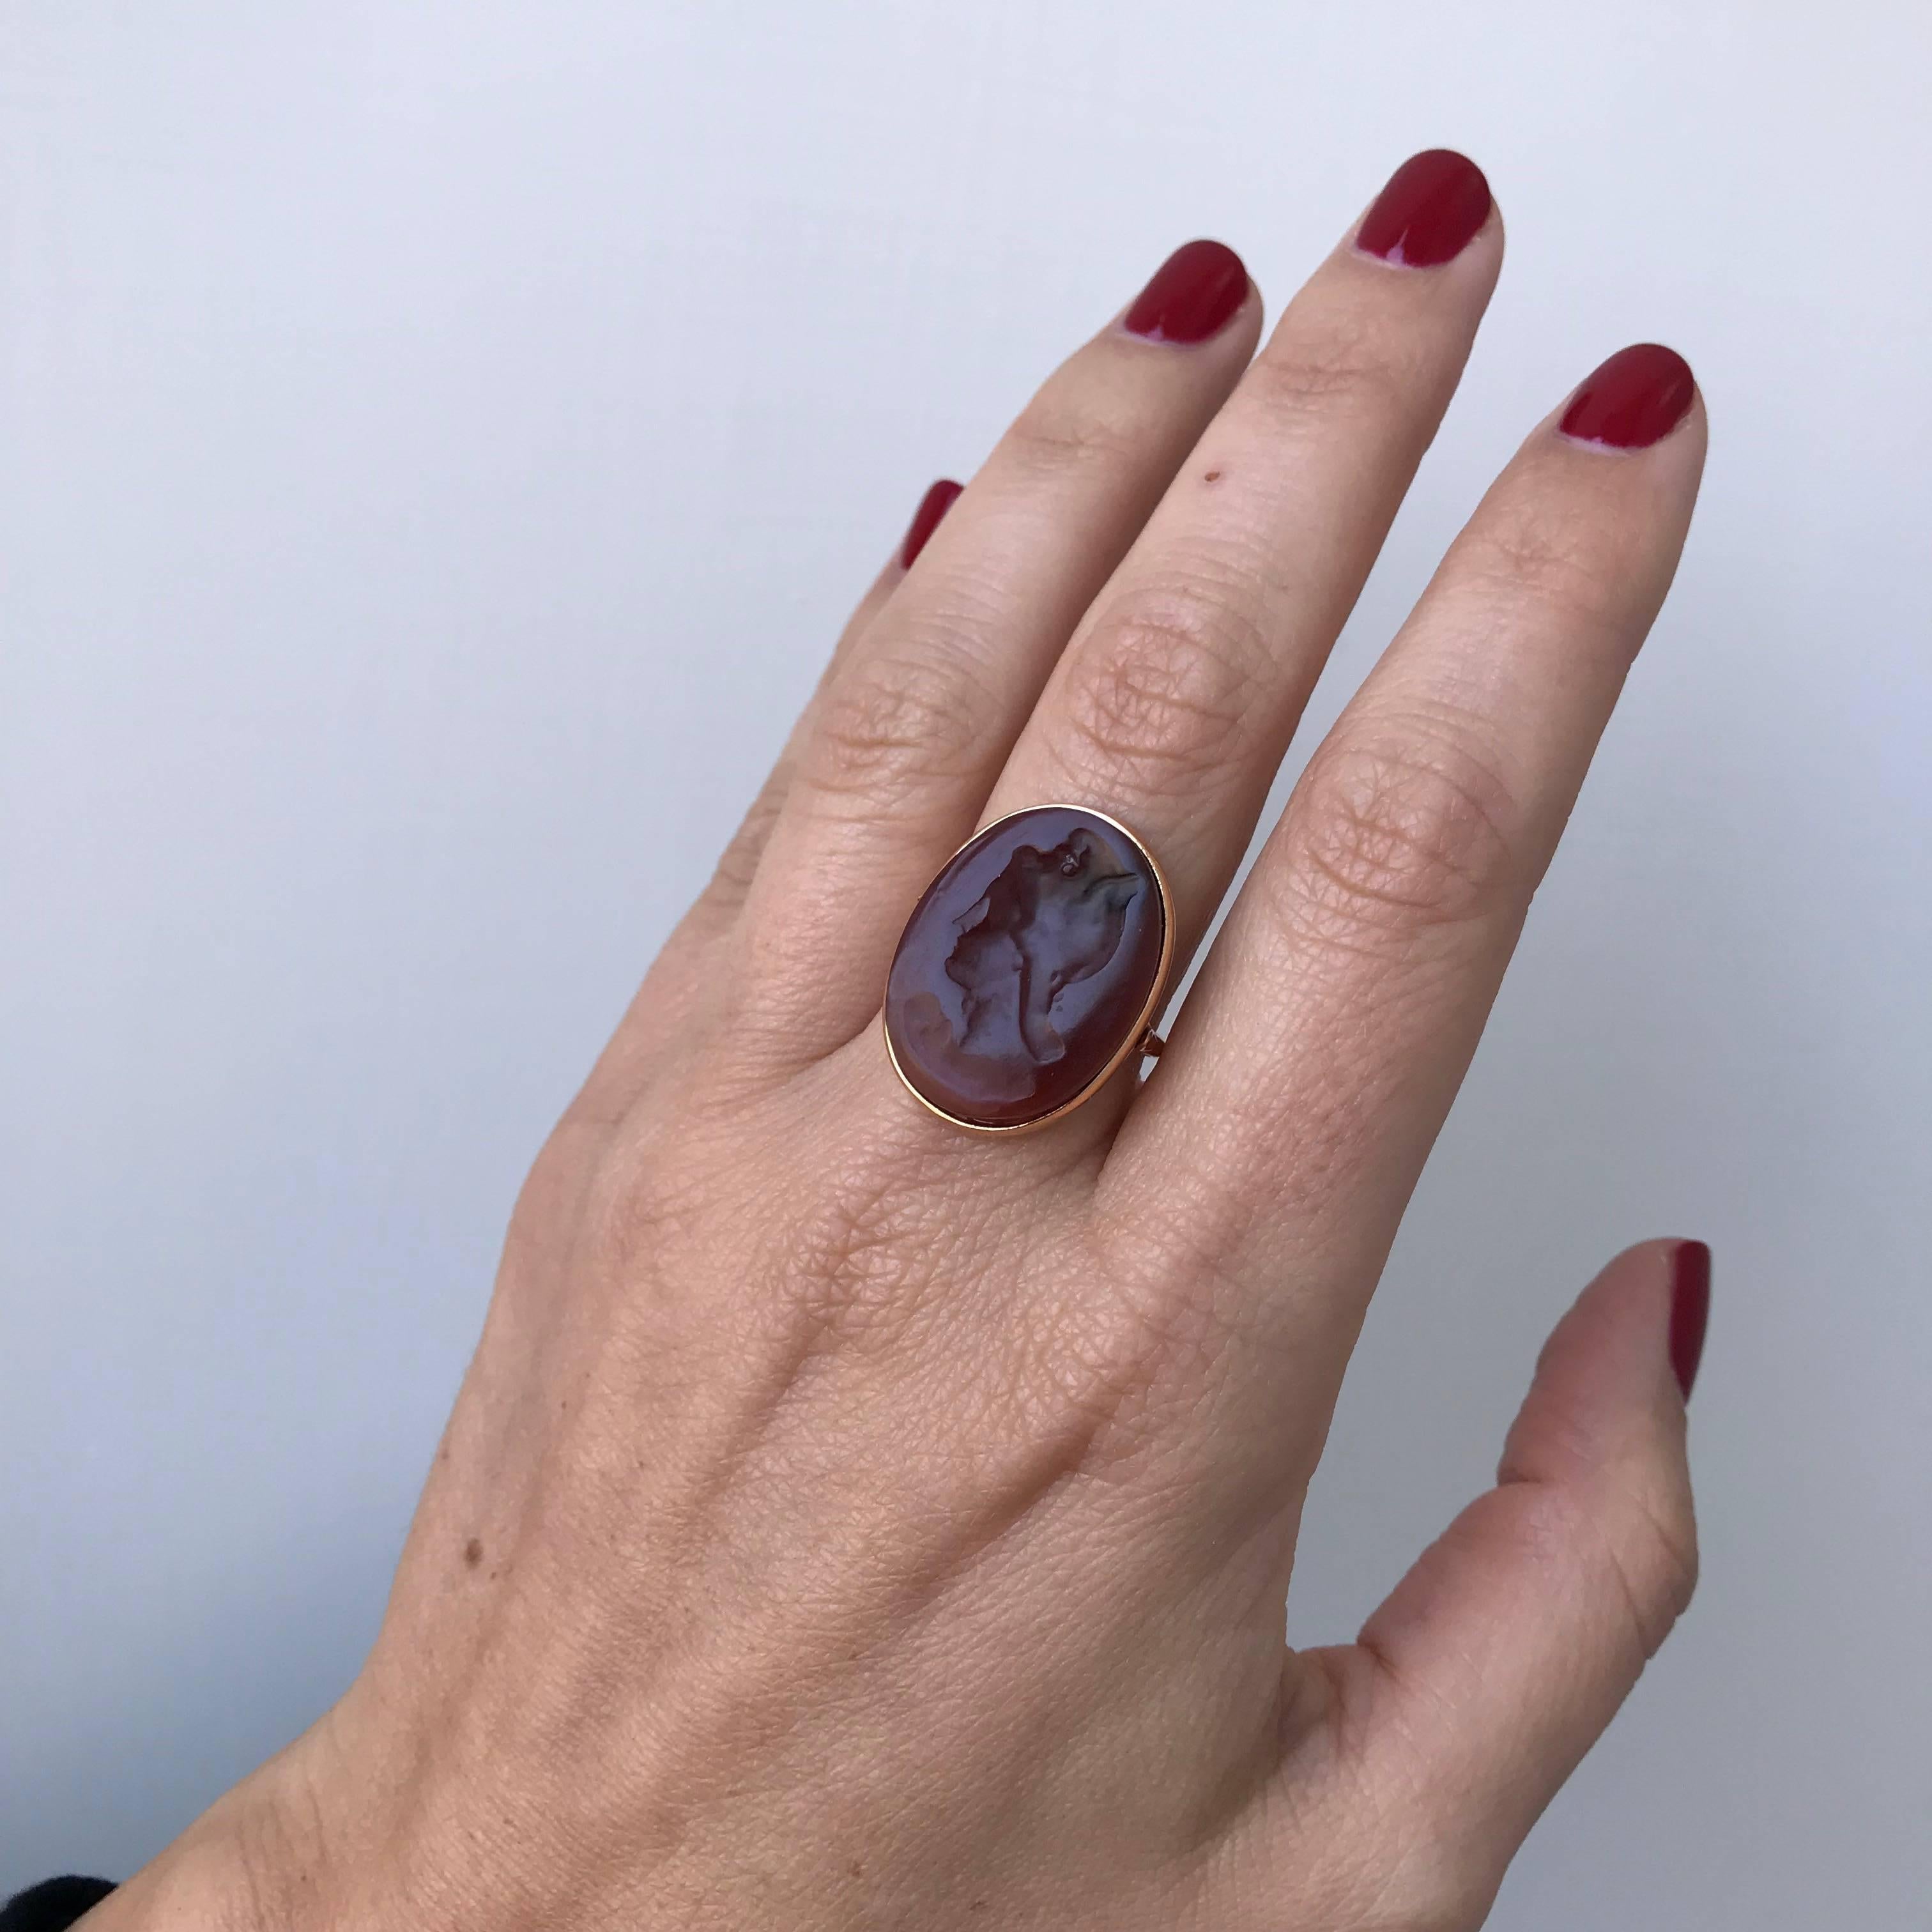 Beautiful Ring mounted in 9k Rose Gold, marked 385. 
The Ring features an old hand carved carnelian depicting the face of a woman.

CONDITION: Excellent 
METAL: 9k Rose Gold 
GEM STONE: Carnelian
DESIGN ERA: 1920
WEIGHT: 6 grams
RING SIZE: US 7/7.5